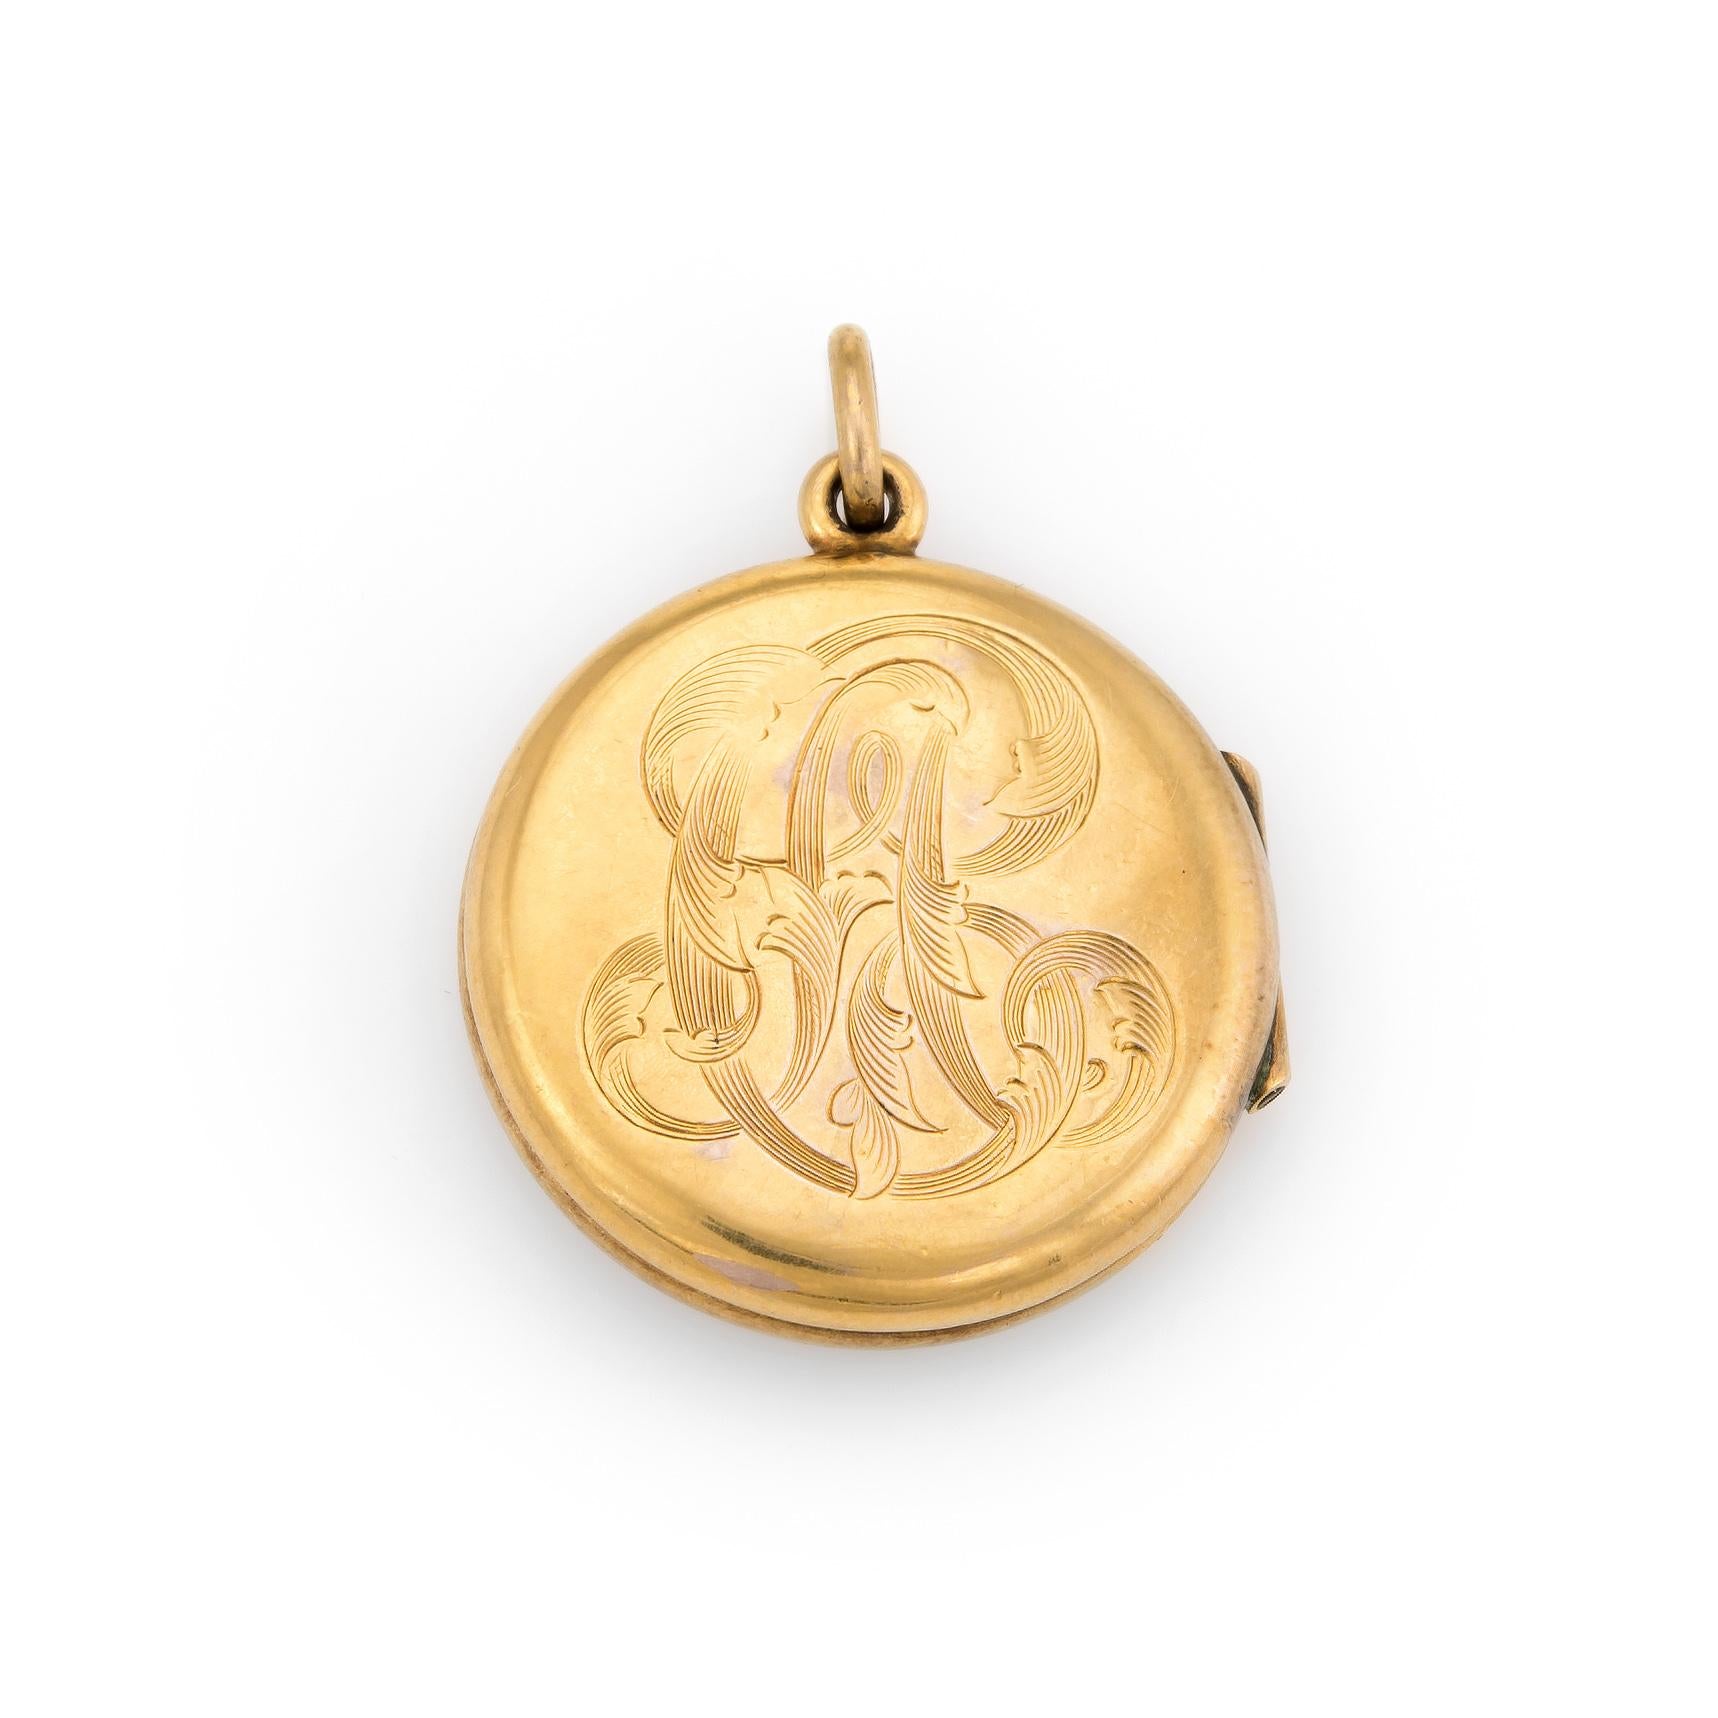 Finely detailed Art Nouveau era locket (circa 1900s to 1910s), crafted in 10 karat yellow gold. 

Old mine cut diamond is estimated at 0.10 carats (estimated at H-I color and VS2-SI1 clarity).

The back of the locket is engraved with the initials